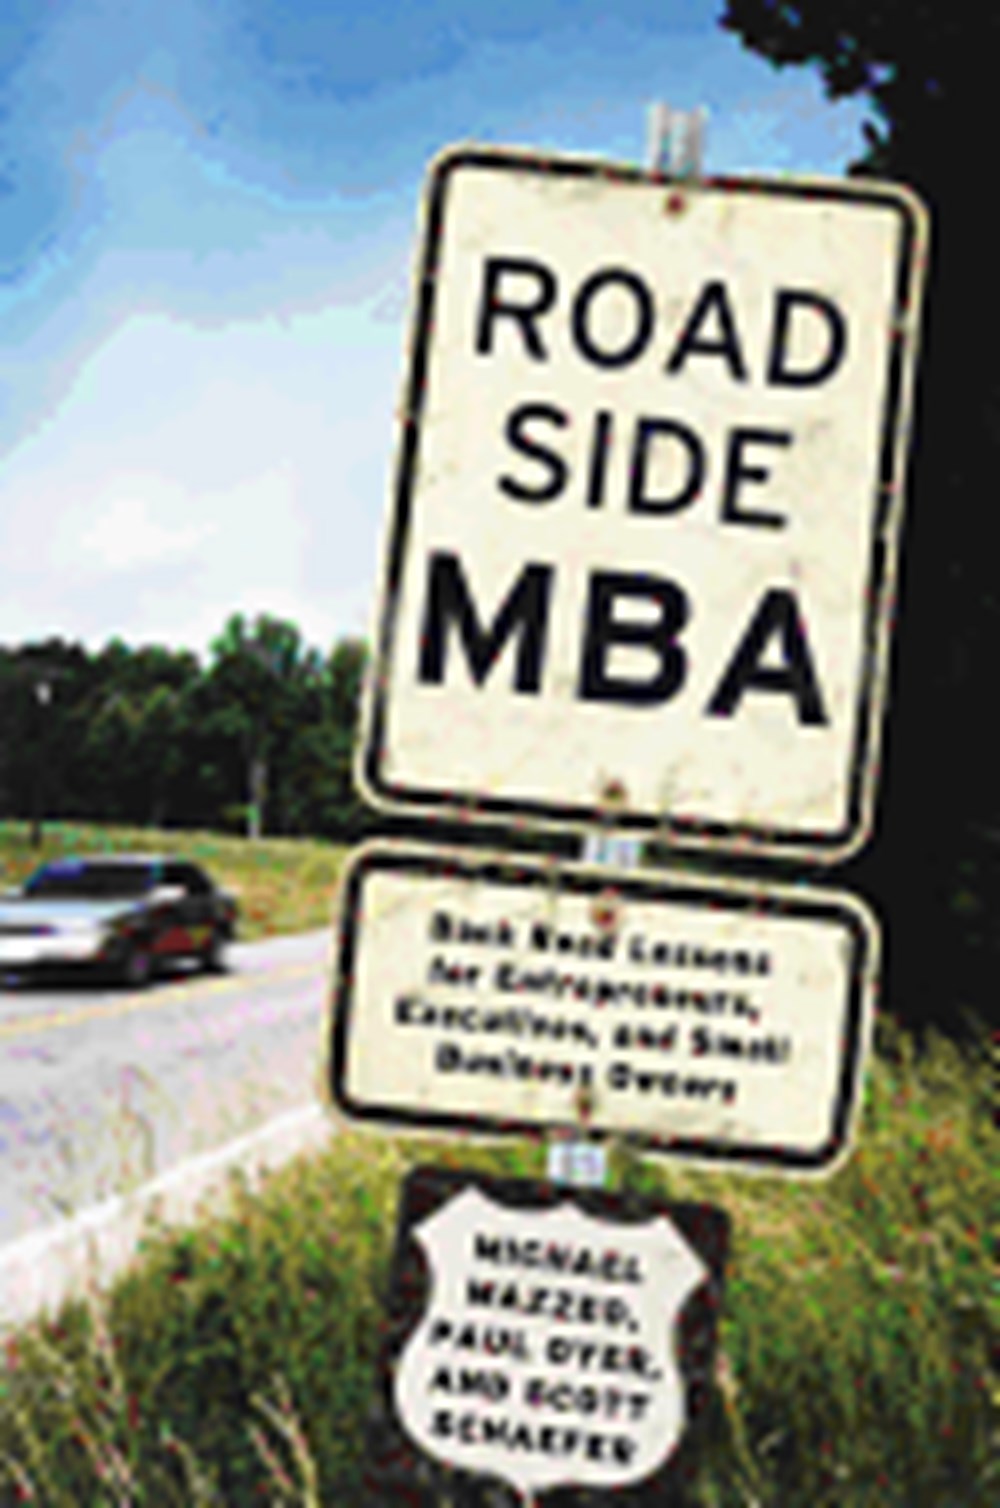 Roadside MBA: Back Road Lessons for Entrepreneurs, Executives, and Small Business Owners